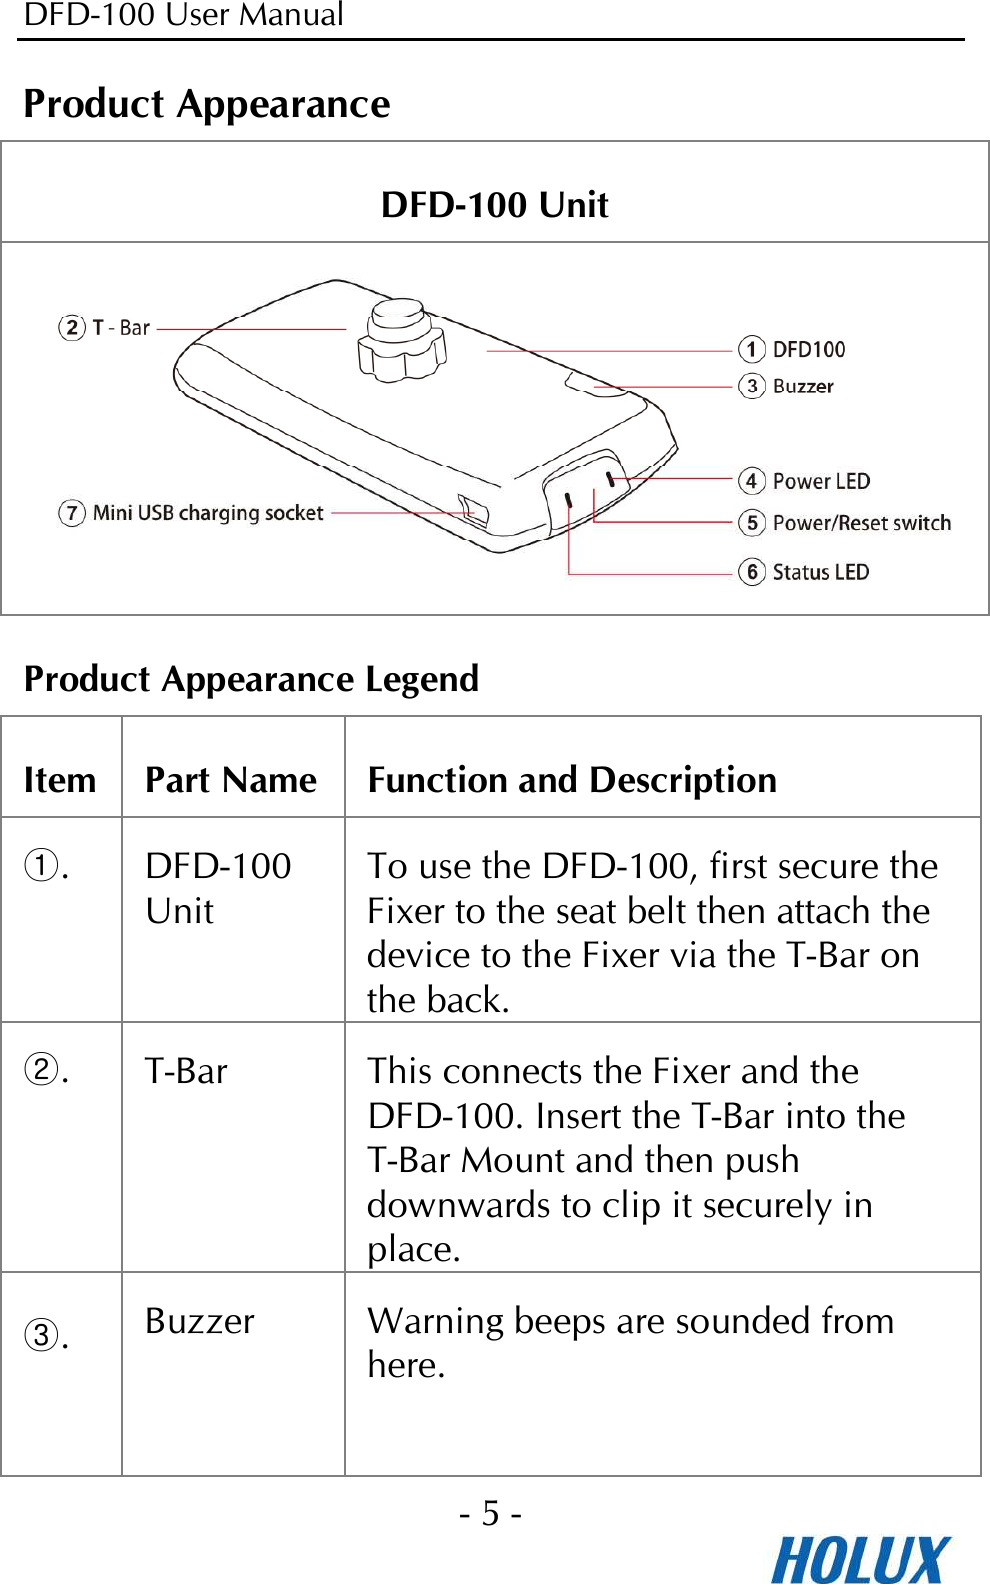 DFD-100 User Manual - 5 -  Product Appearance DFD-100 Unit  Product Appearance Legend Item Part Name Function and Description ①. DFD-100 Unit To use the DFD-100, first secure the Fixer to the seat belt then attach the device to the Fixer via the T-Bar on the back. ②. T-Bar  This connects the Fixer and the DFD-100. Insert the T-Bar into the T-Bar Mount and then push downwards to clip it securely in place. ③. Buzzer  Warning beeps are sounded from here.   